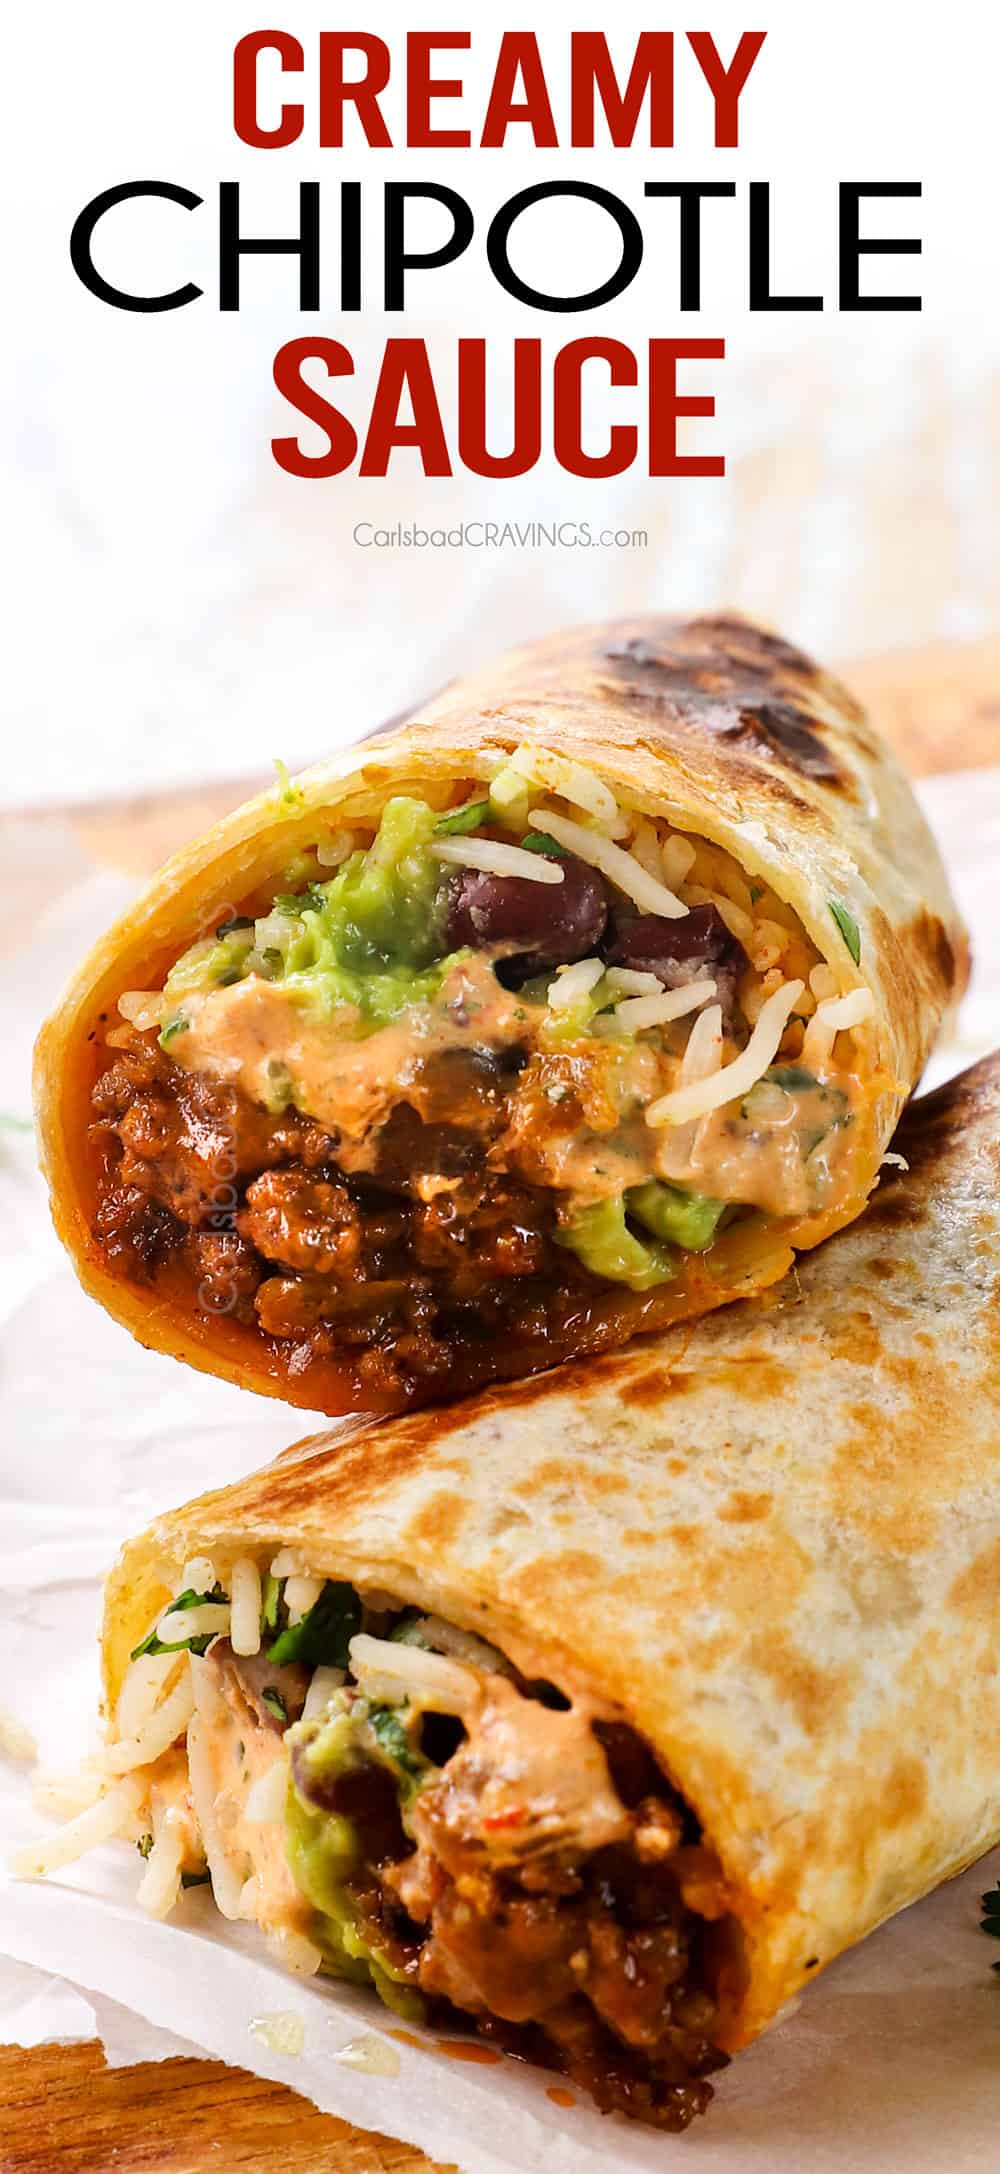 showing how to serve Chipotle Sauce recipe by adding to a burrito